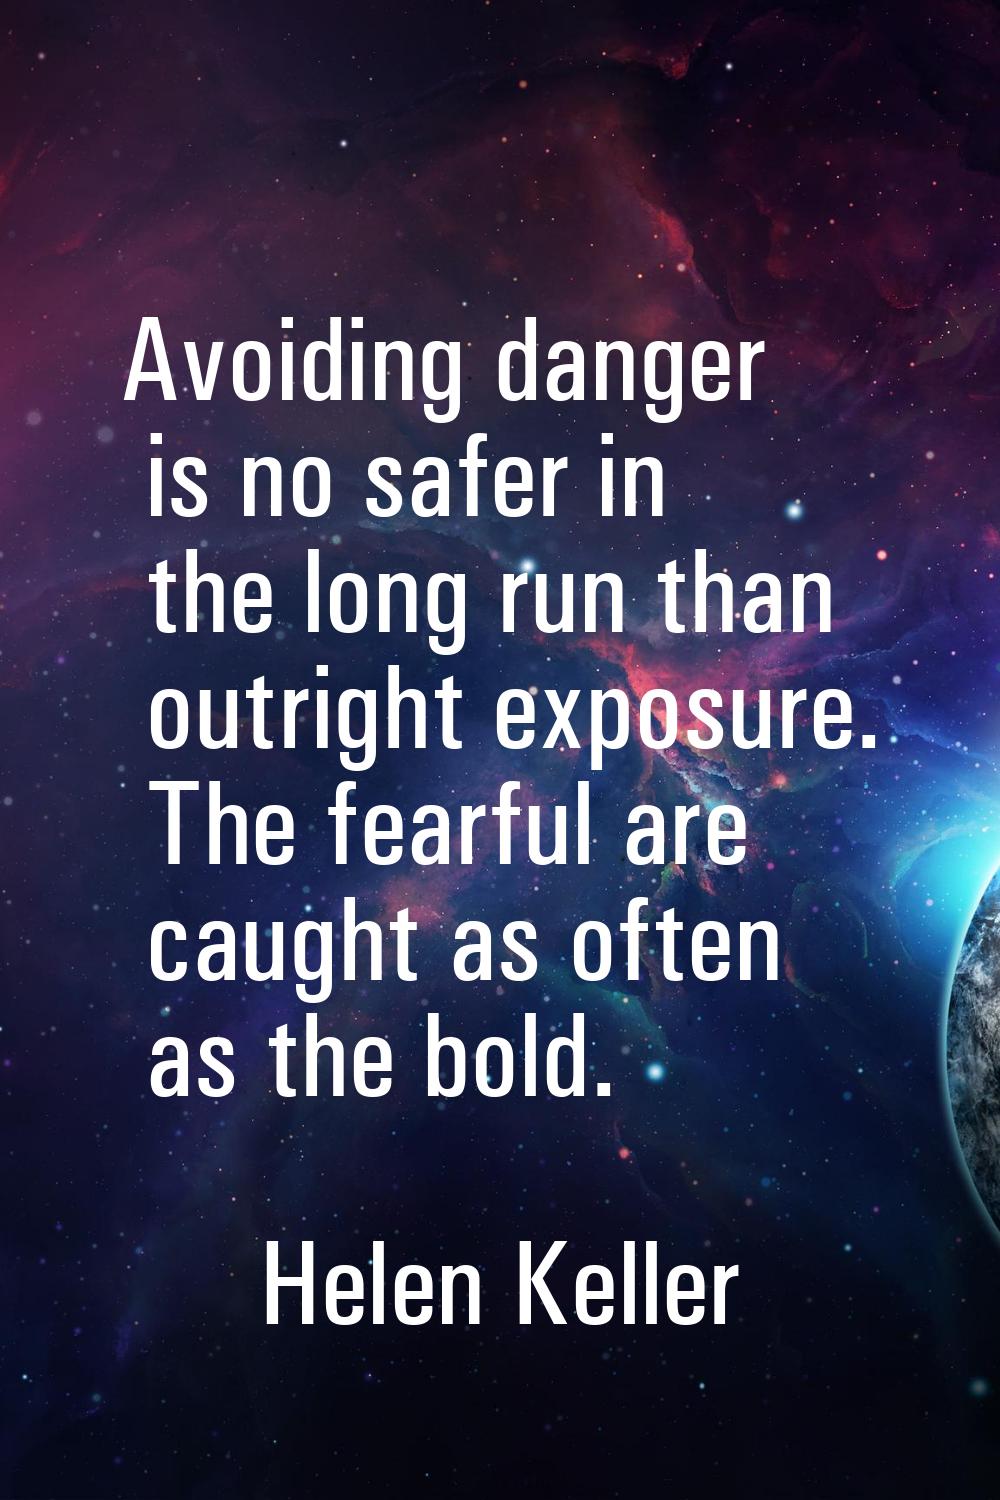 Avoiding danger is no safer in the long run than outright exposure. The fearful are caught as often